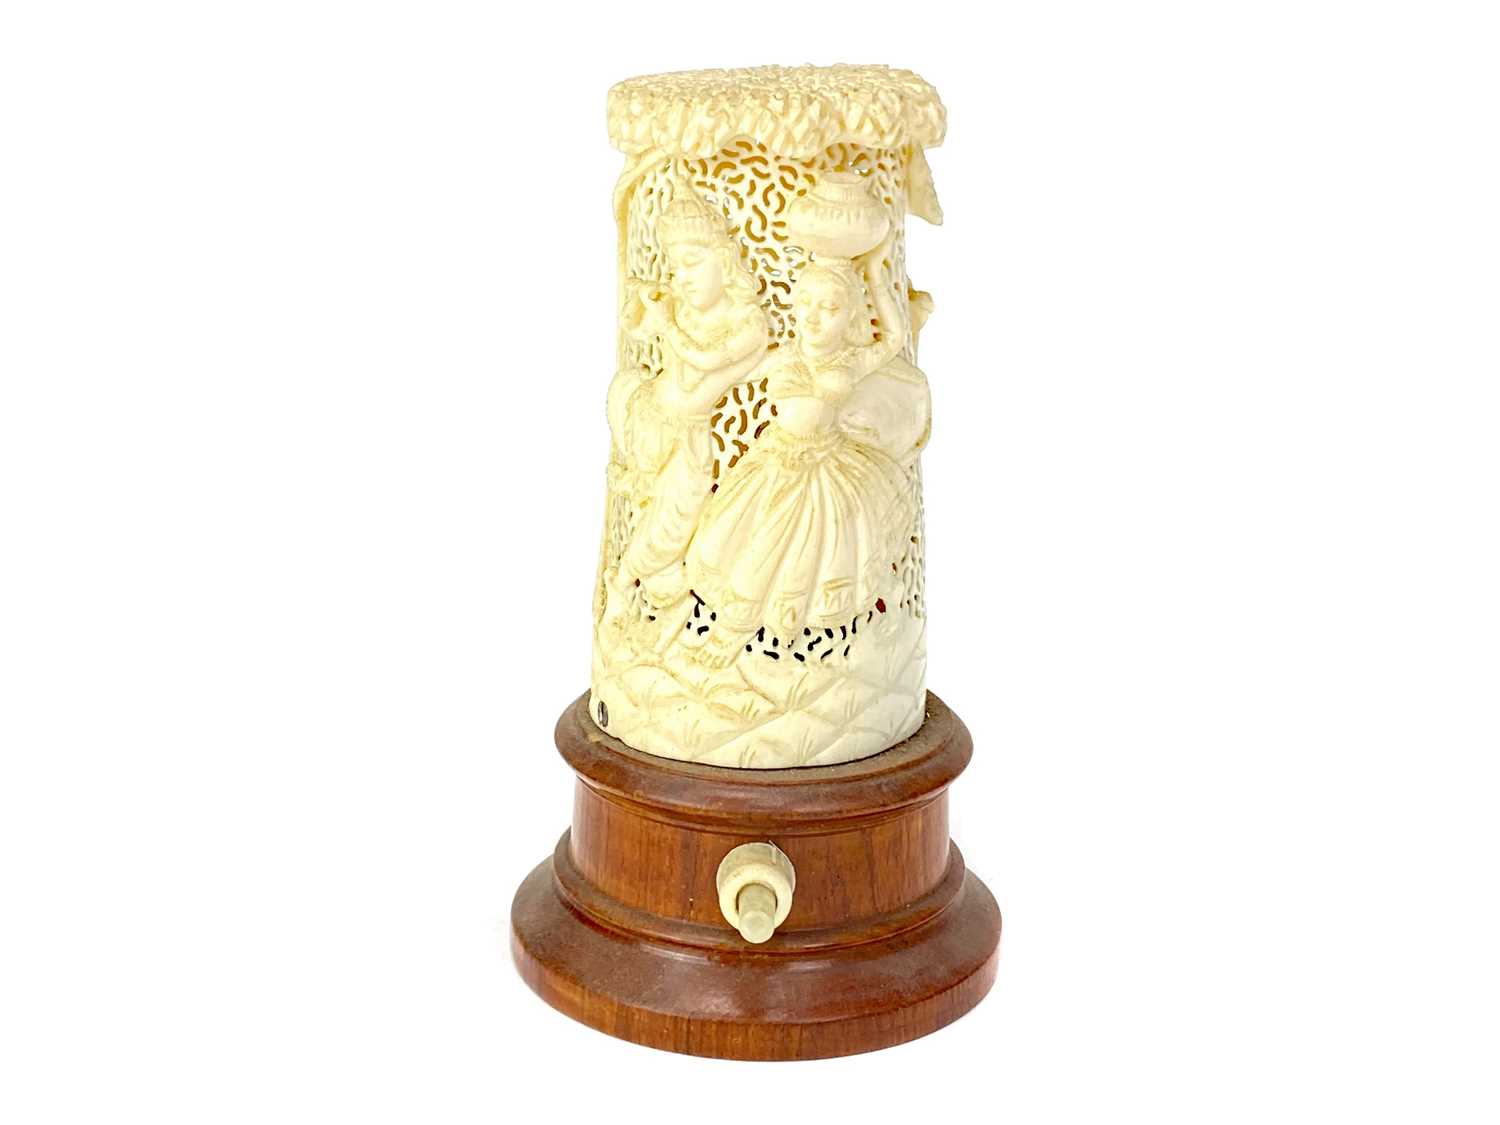 Lot 831 - AN EARLY 20TH CENTURY INDIAN IVORY LIGHT